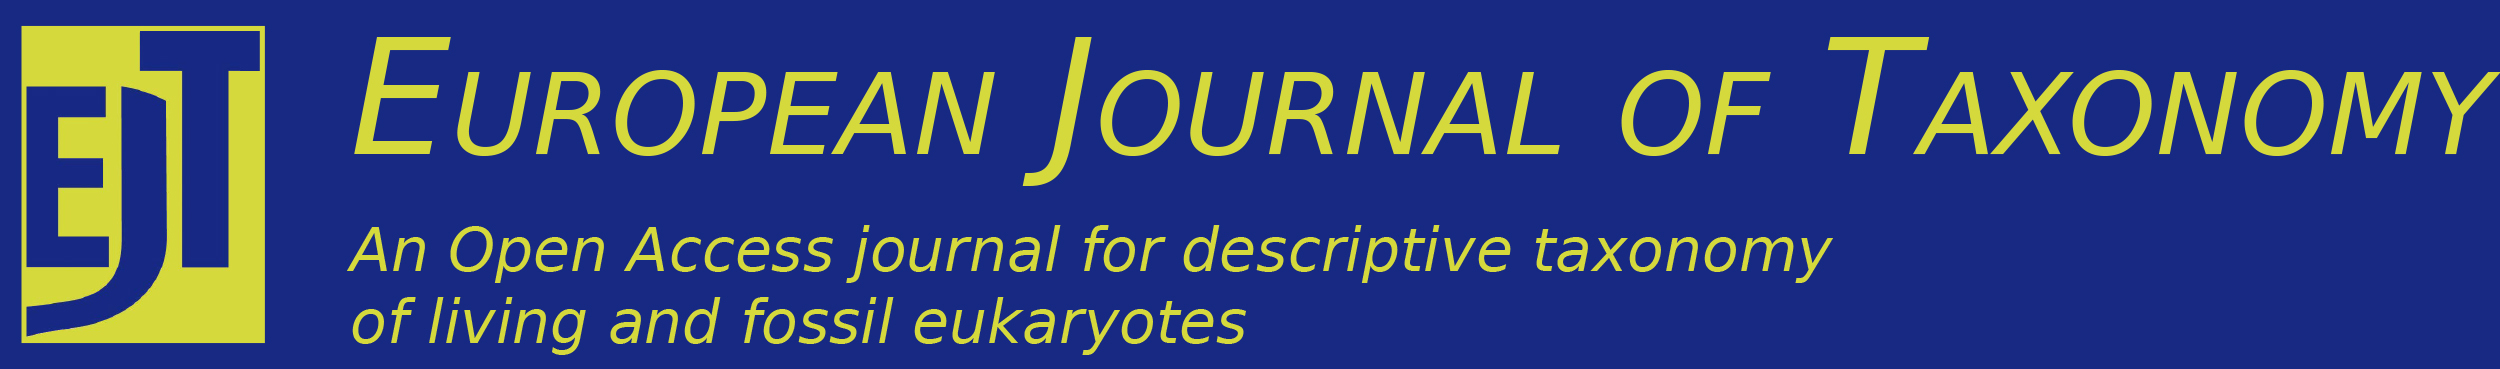 European Journal of Taxonomy logo and journal title